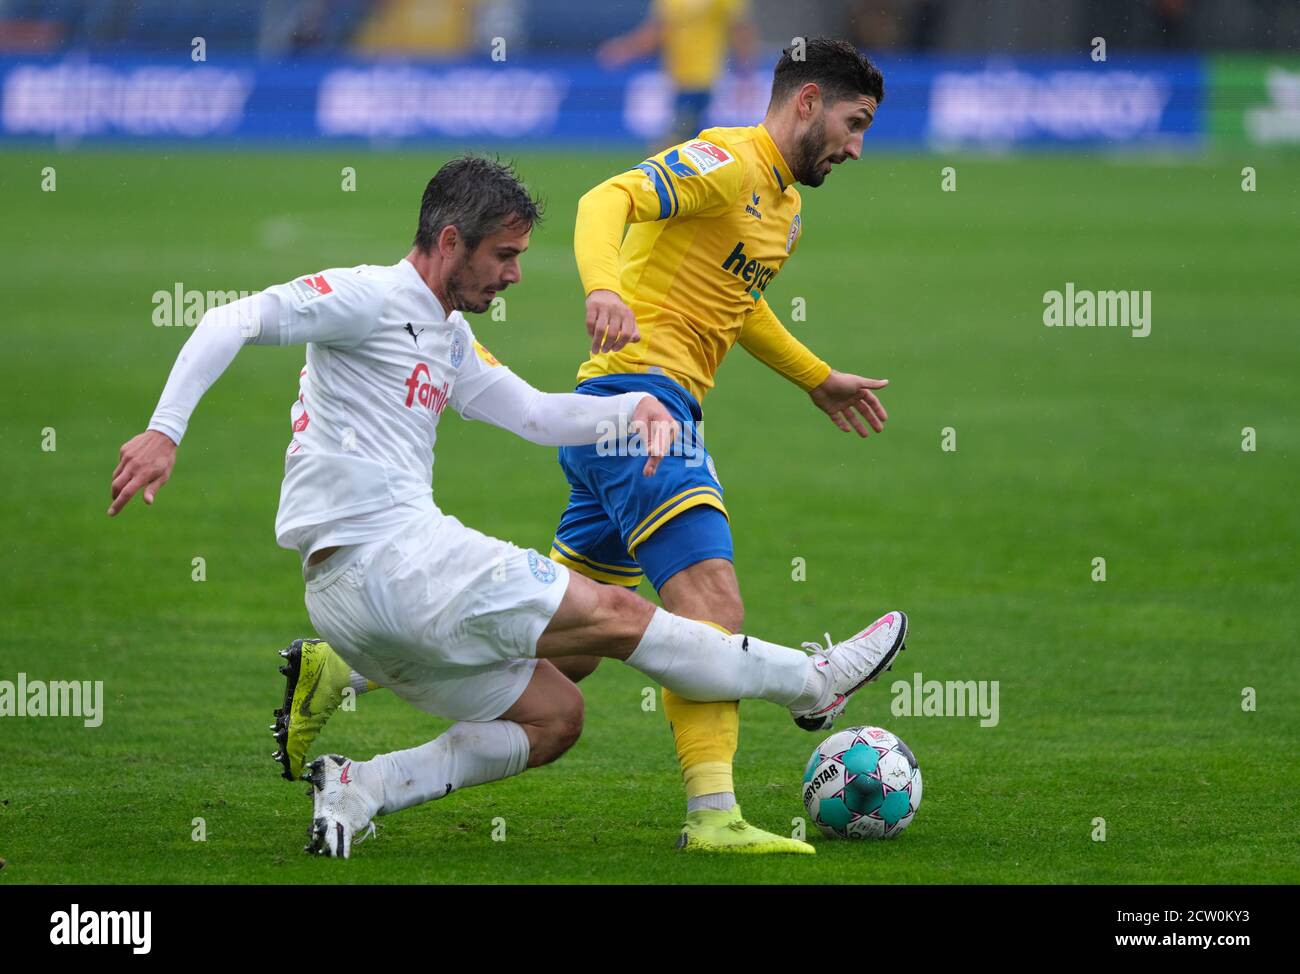 26 September 2020, Lower Saxony, Brunswick: Football: 2nd Bundesliga, Eintracht Braunschweig - Holstein Kiel, 2nd matchday at the Eintracht stadium. Braunschweig's Fabio Kaufmann (r) and Kiels Fin Bartels fight for the ball. Photo: Peter Steffen/dpa - IMPORTANT NOTE: In accordance with the regulations of the DFL Deutsche Fußball Liga and the DFB Deutscher Fußball-Bund, it is prohibited to exploit or have exploited in the stadium and/or from the game taken photographs in the form of sequence images and/or video-like photo series. Stock Photo